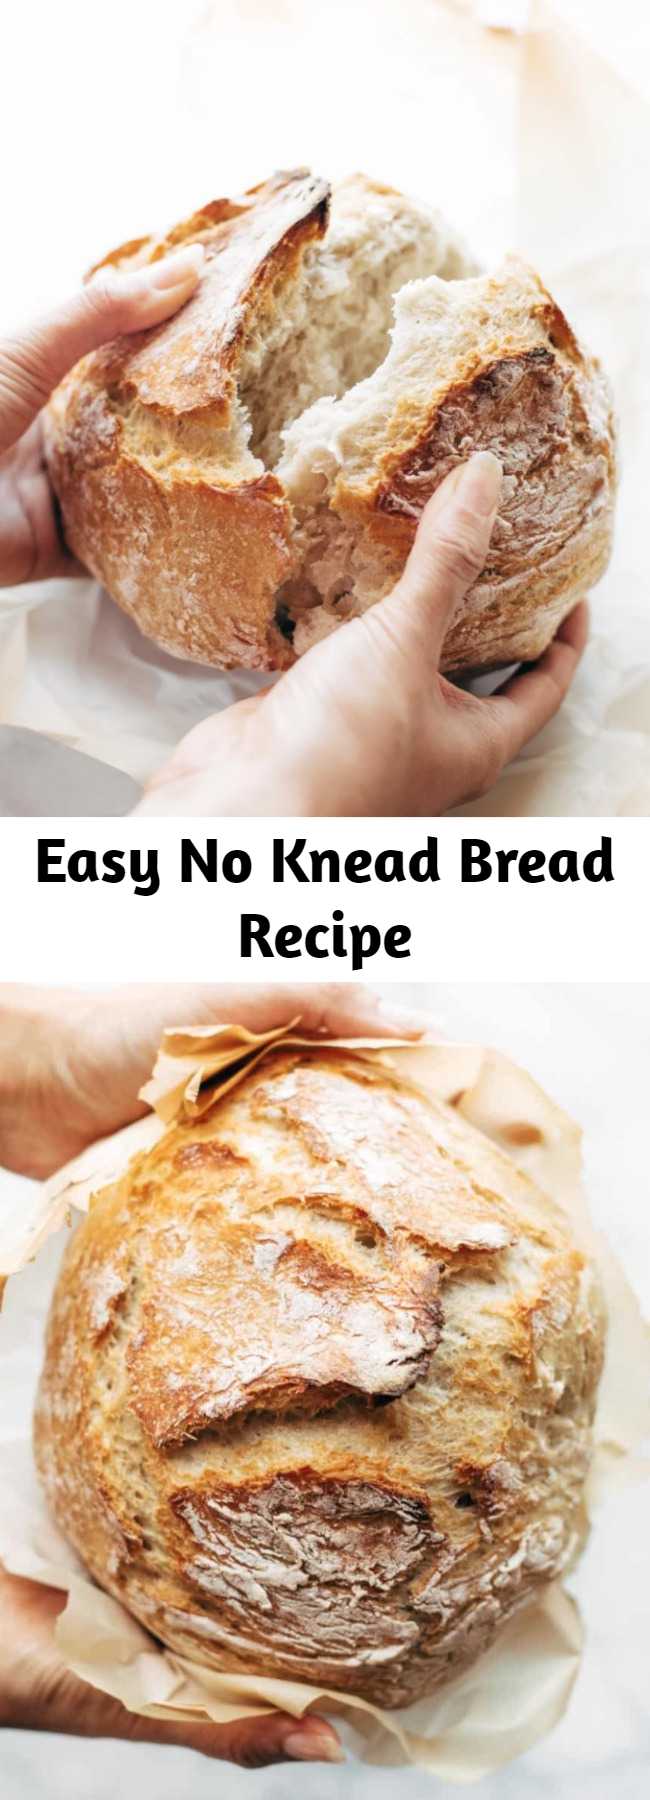 Easy No Knead Bread Recipe - Miracle No Knead Bread! this is SO UNBELIEVABLY GOOD and ridiculously easy to make. crusty outside, soft and chewy inside – perfect for dunking in soups! #bread #easy #recipe #noknead